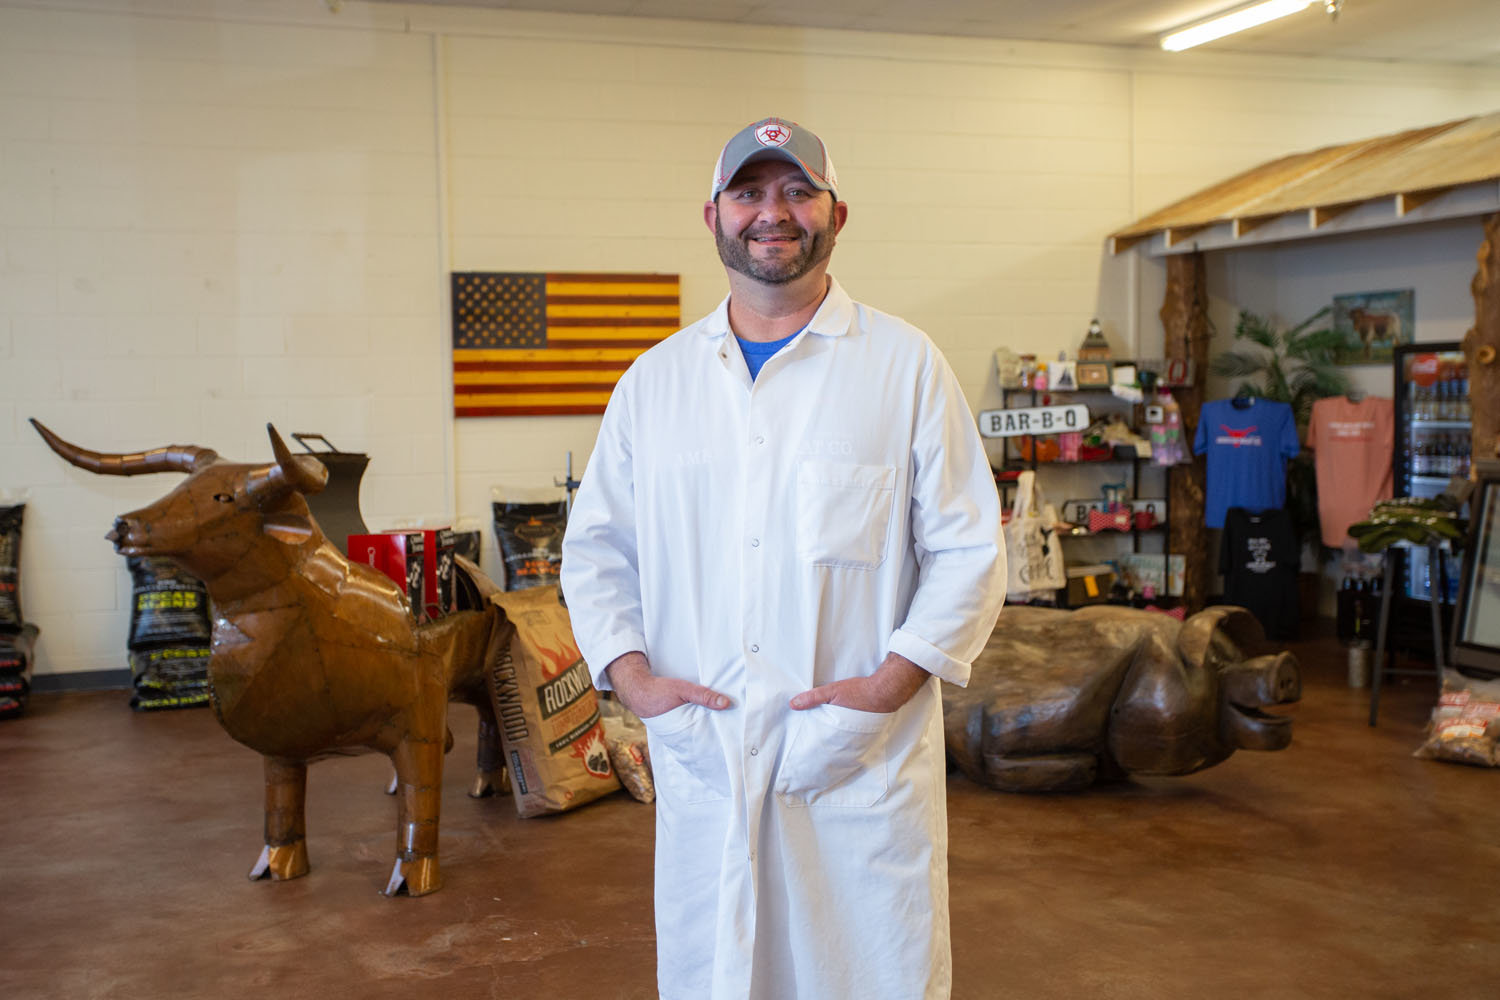 A PLACE TO MEAT: Jason Owen leads a small staff at American Meat Co., succeeding his father seven years ago as owner of the butcher shop.